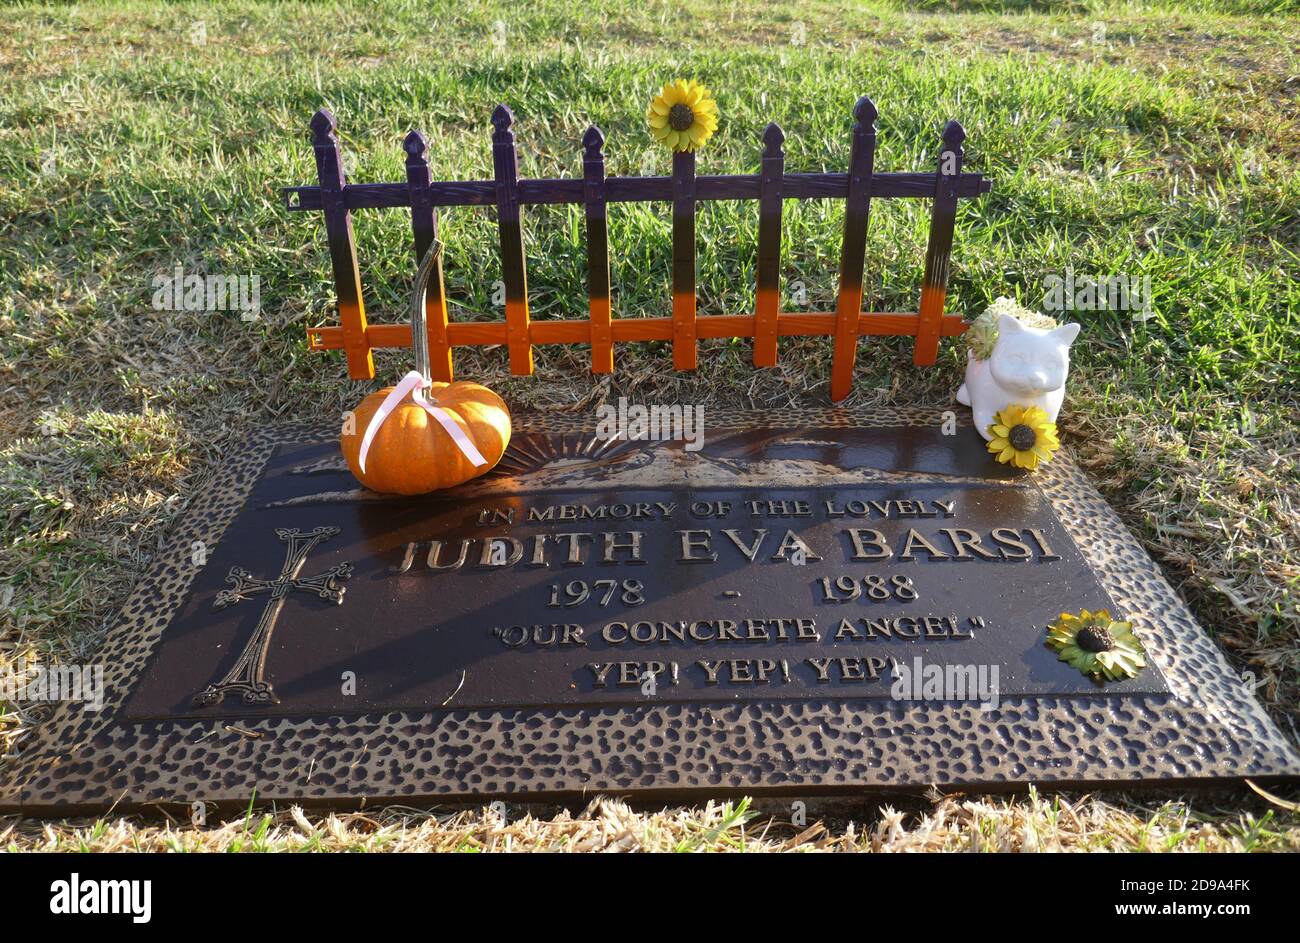 Los Angeles, California, USA 3rd November 2020 A general view of atmosphere of actress Judith Barsi's grave at Forest Lawn Hollywood Hills Memorial Park on November 3, 2020 in Los Angeles, California, USA. Photo by Barry King/Alamy Stock Photo Stock Photo